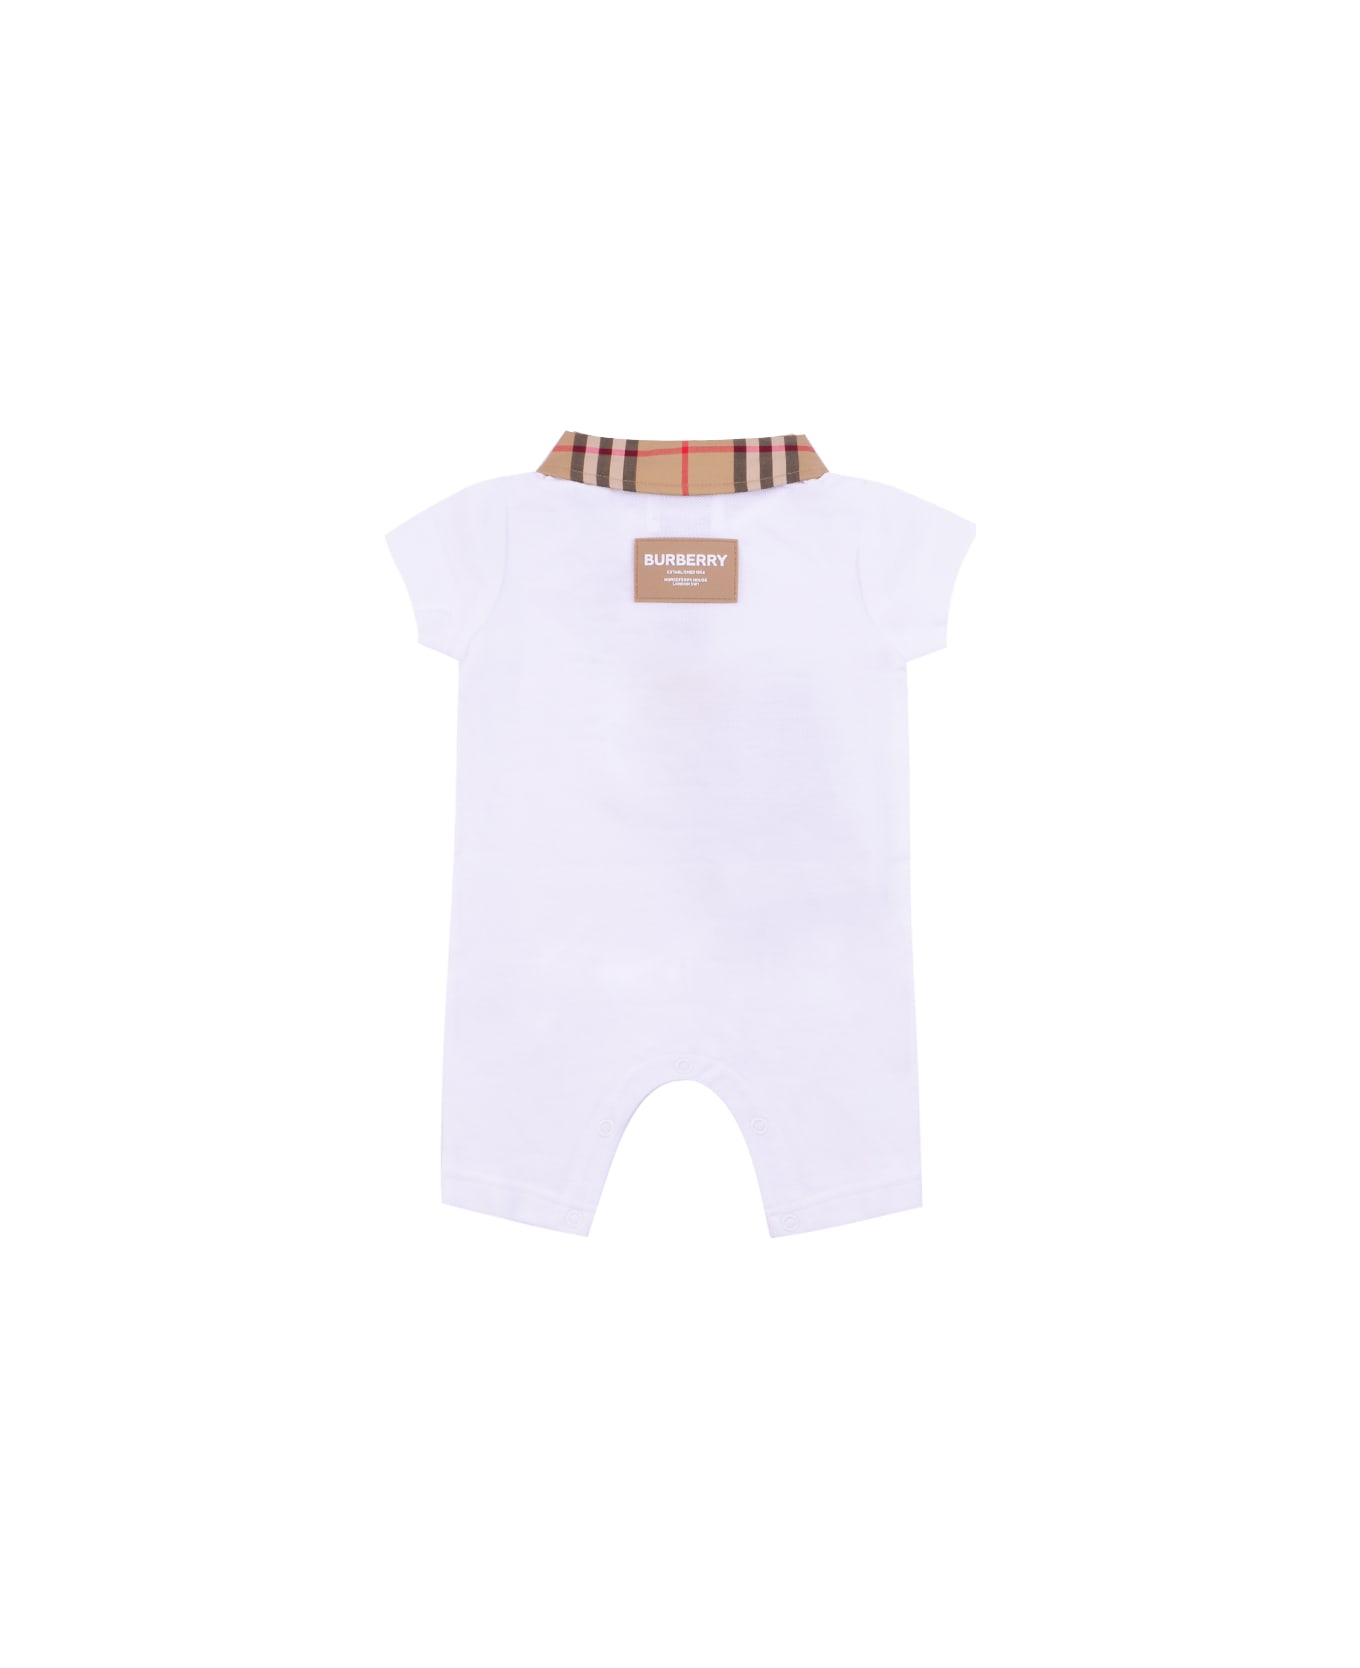 Burberry Romper In Cotton Piqué With Tartan Finishes - White